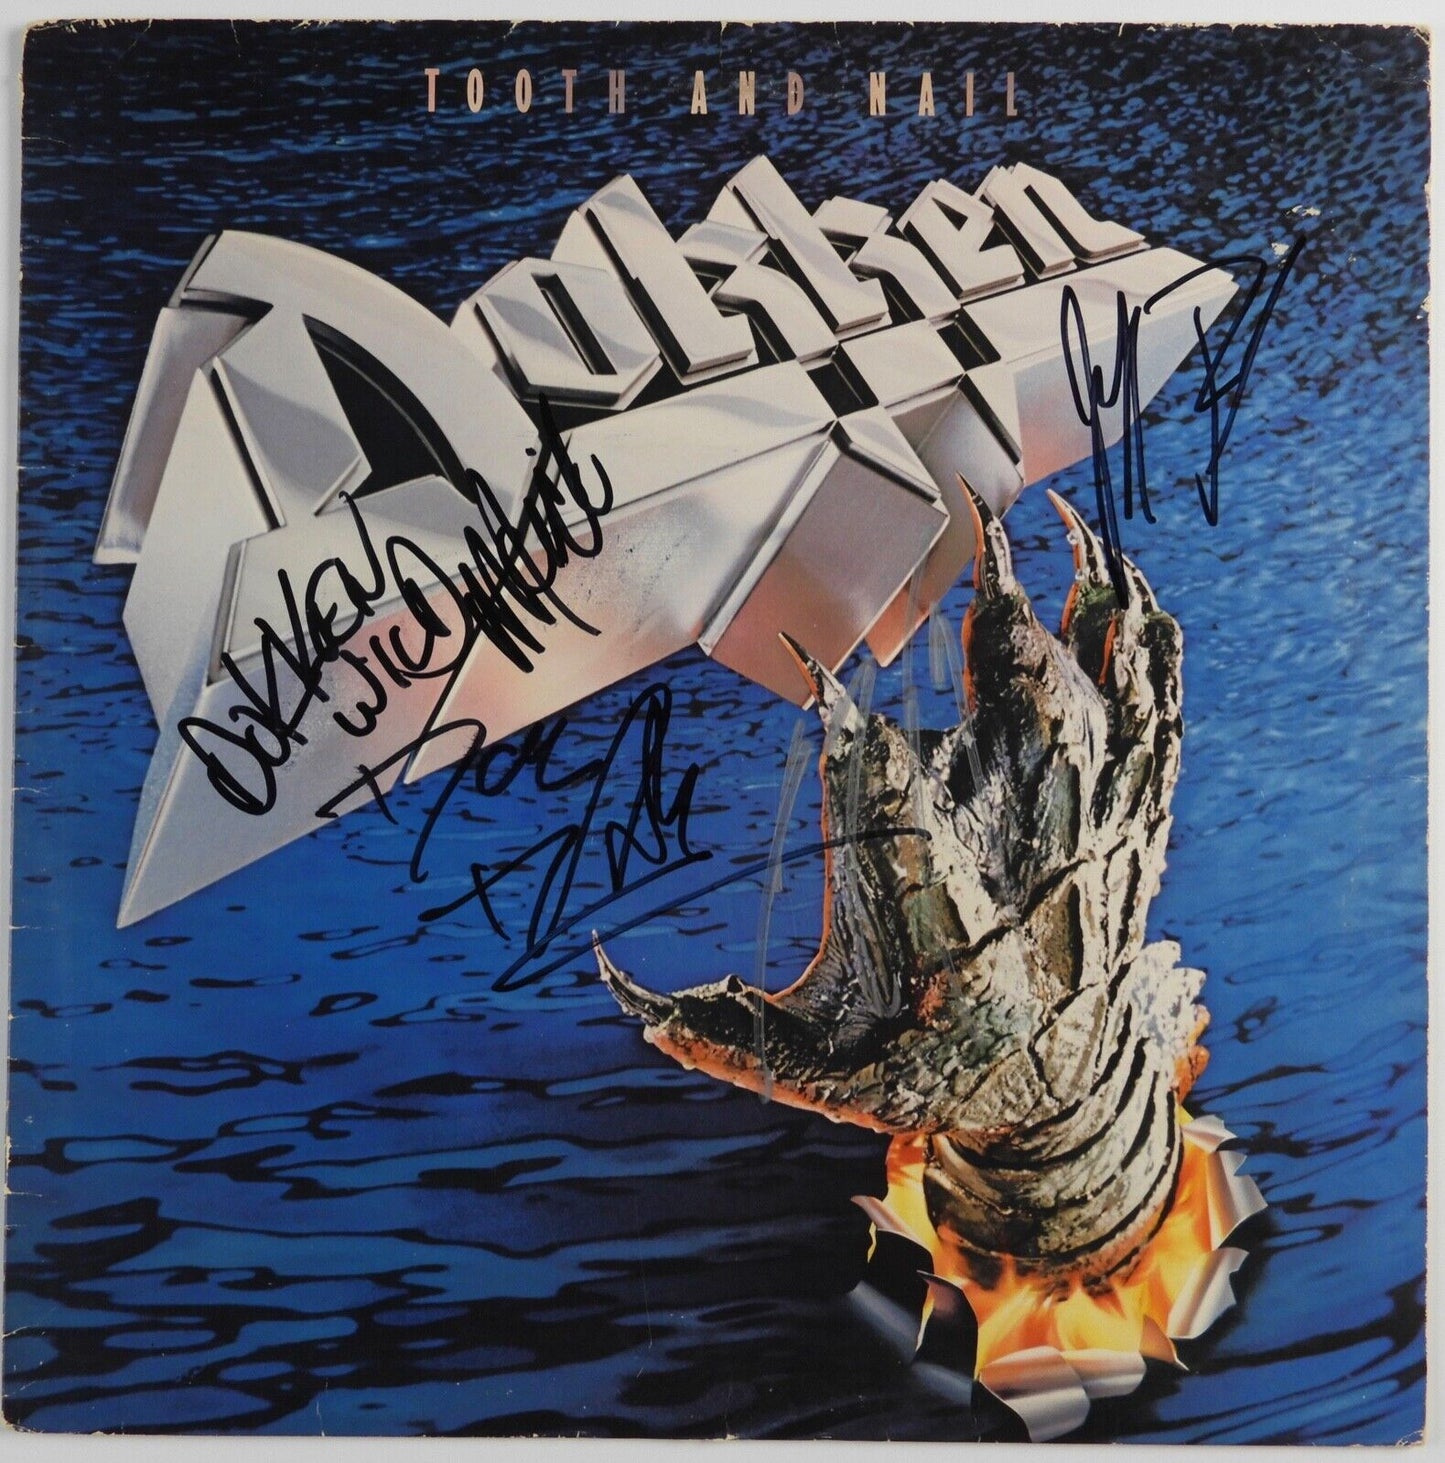 Dokken Signed Autograph JSA Record Album Vinyl Tooth And Nail